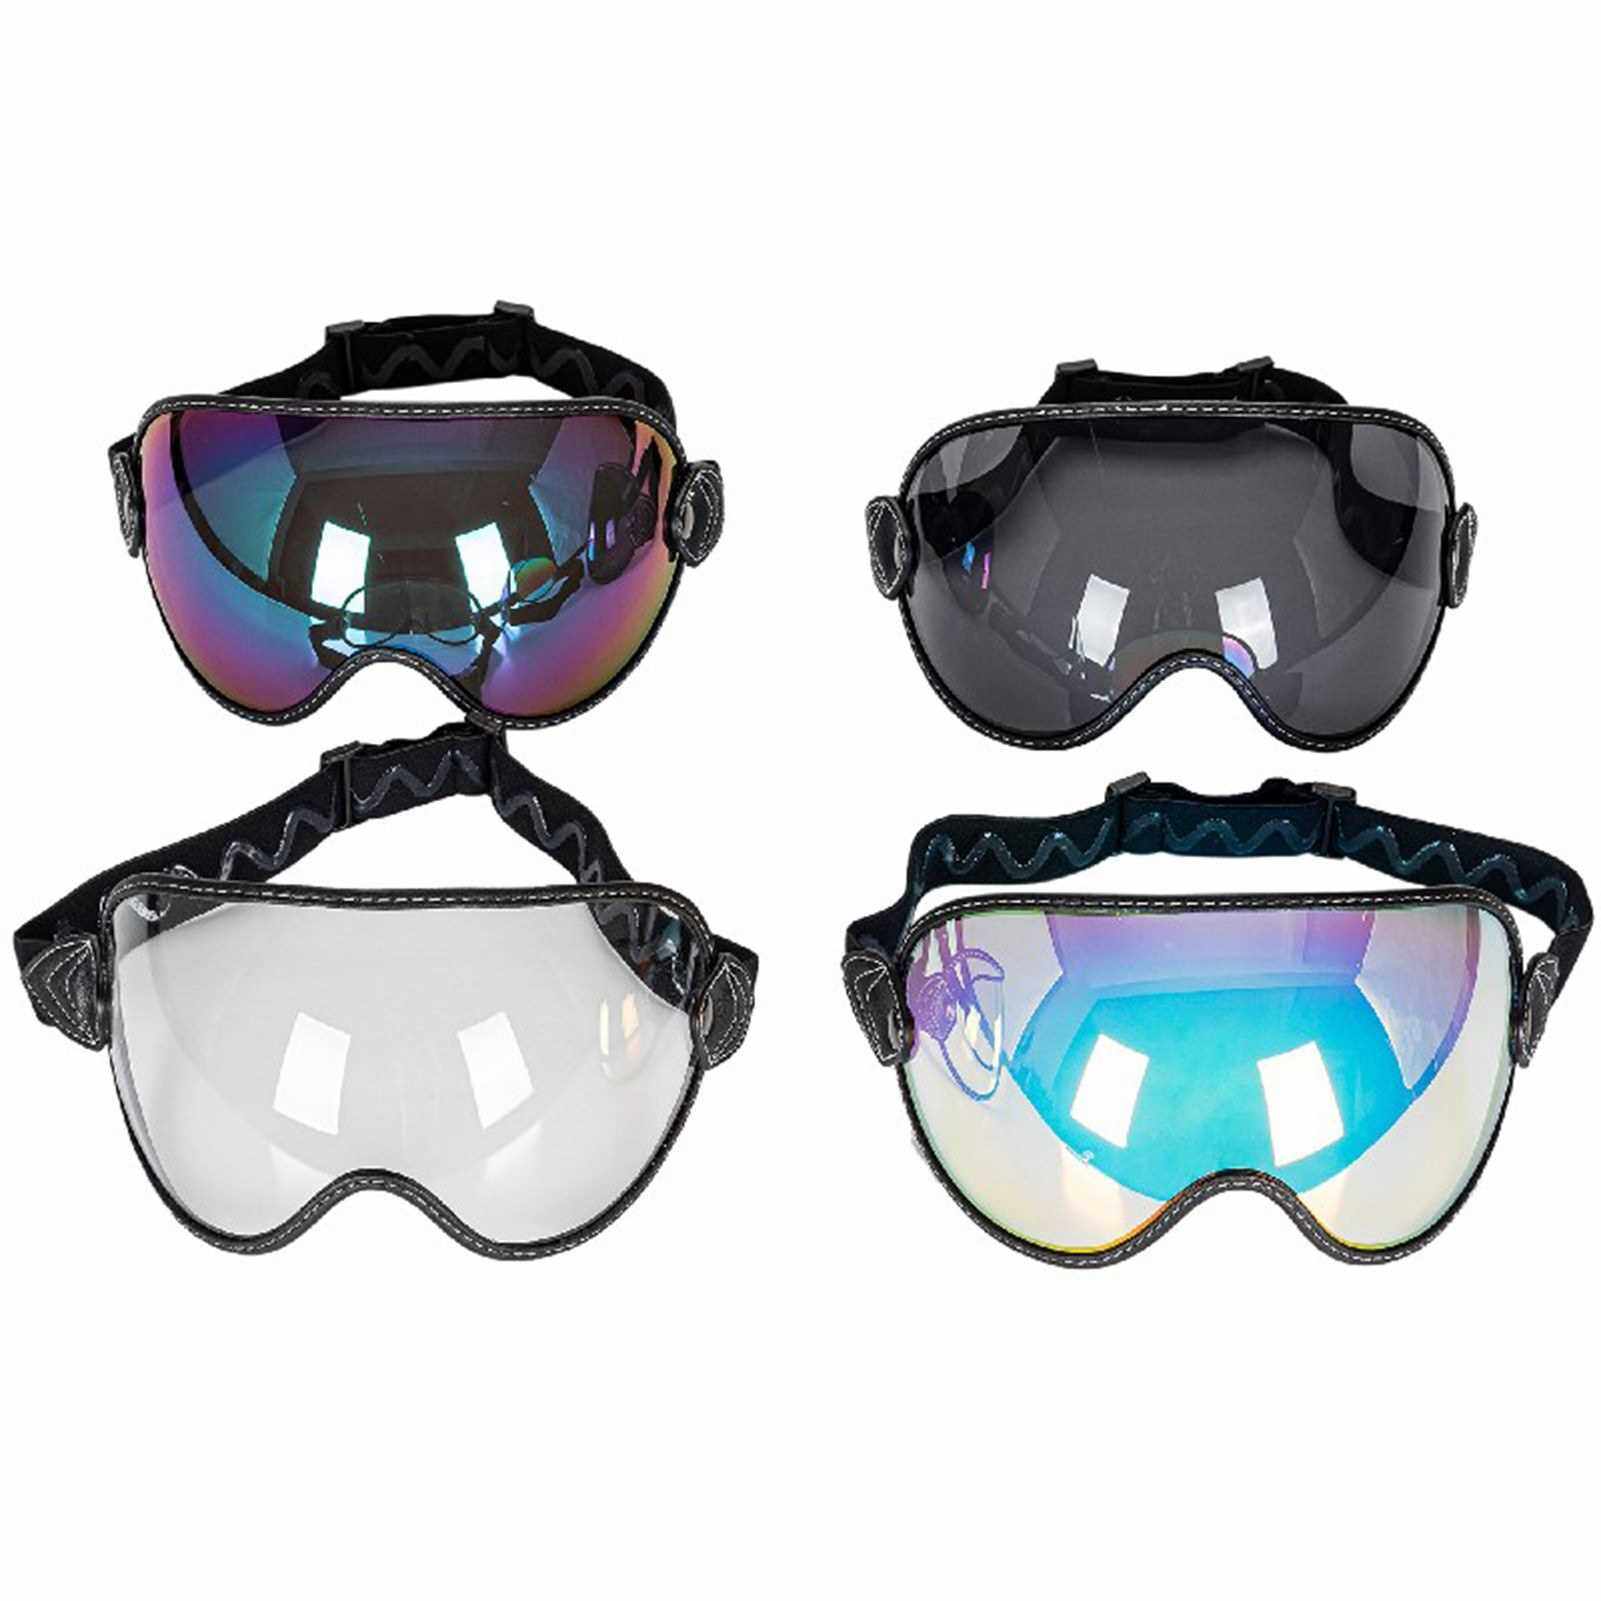 Motorcycle Motocross Goggles Dirt Bike ATV Goggles Riding Goggles MX Goggles Powersports Offroad Goggle Anti UV Windproof Dustproof Safety Goggles (Transparent)